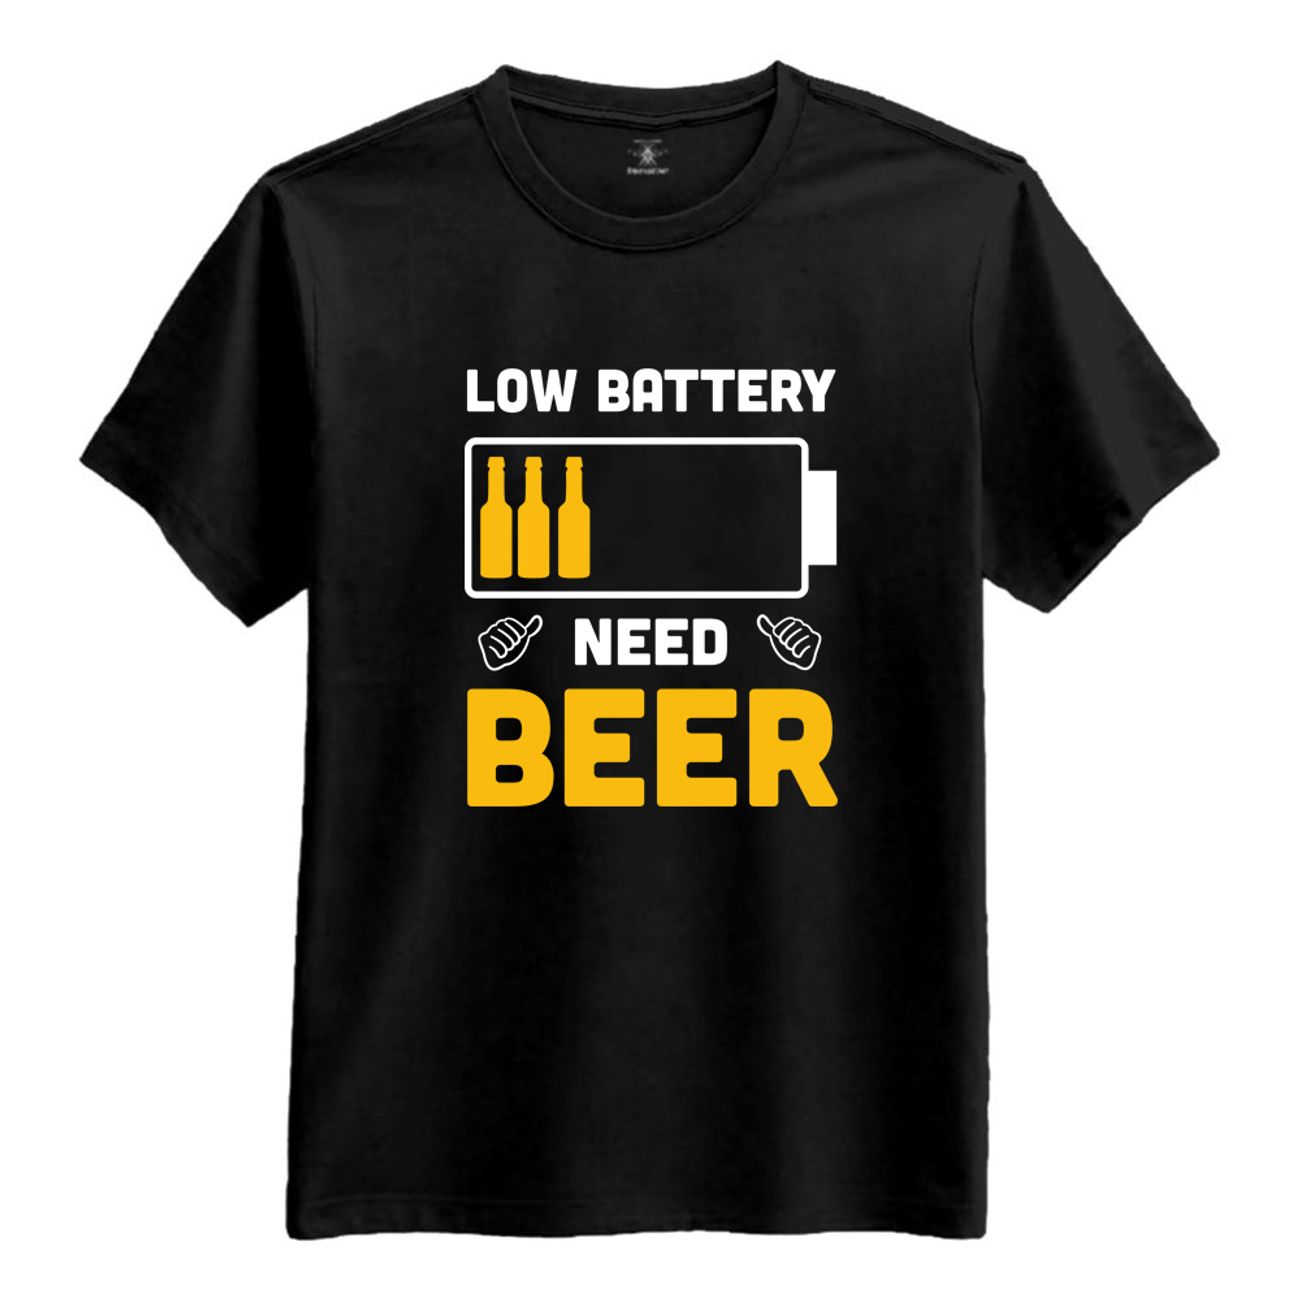 low-battery-need-beer-t-shirt-74573-3